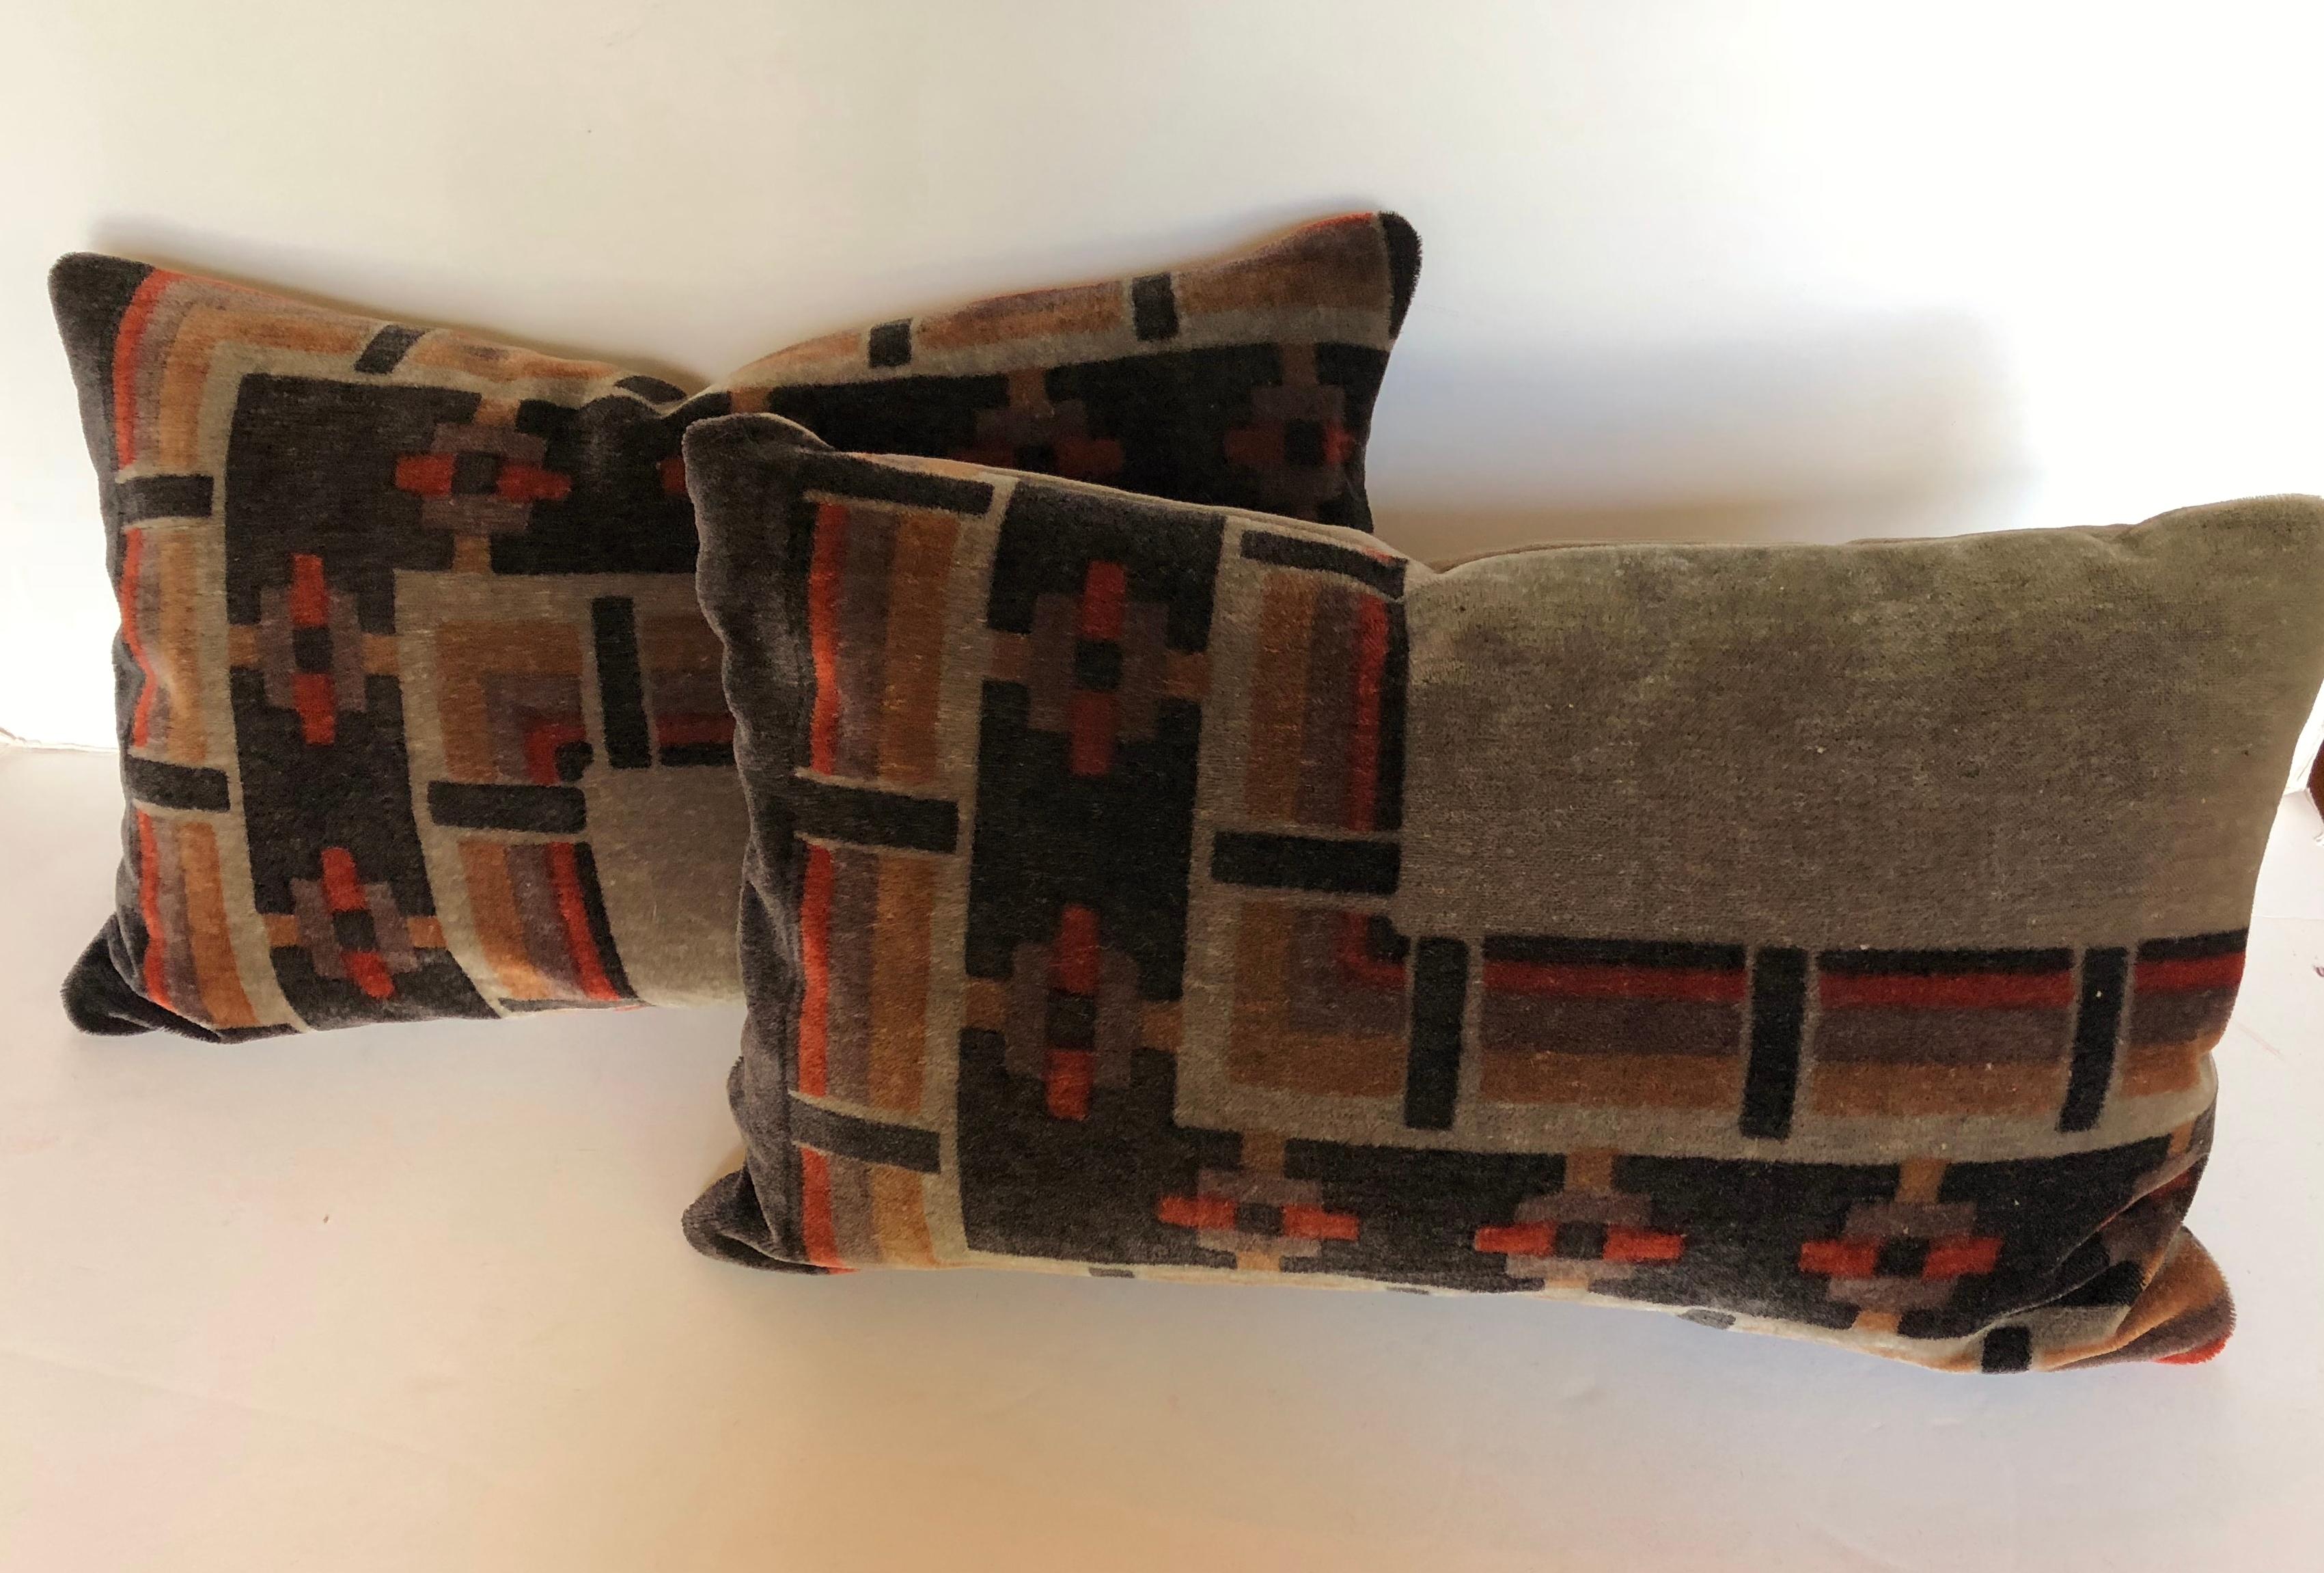 Custom pillows cut from a vintage Amsterdam School silk mohair textile, circa 1915-1927. Hand blocked with good color and very soft hand. Very rare textile.
Pillows are backed in velvet, filled with inserts of 50/50 down and feathers and hand sewn